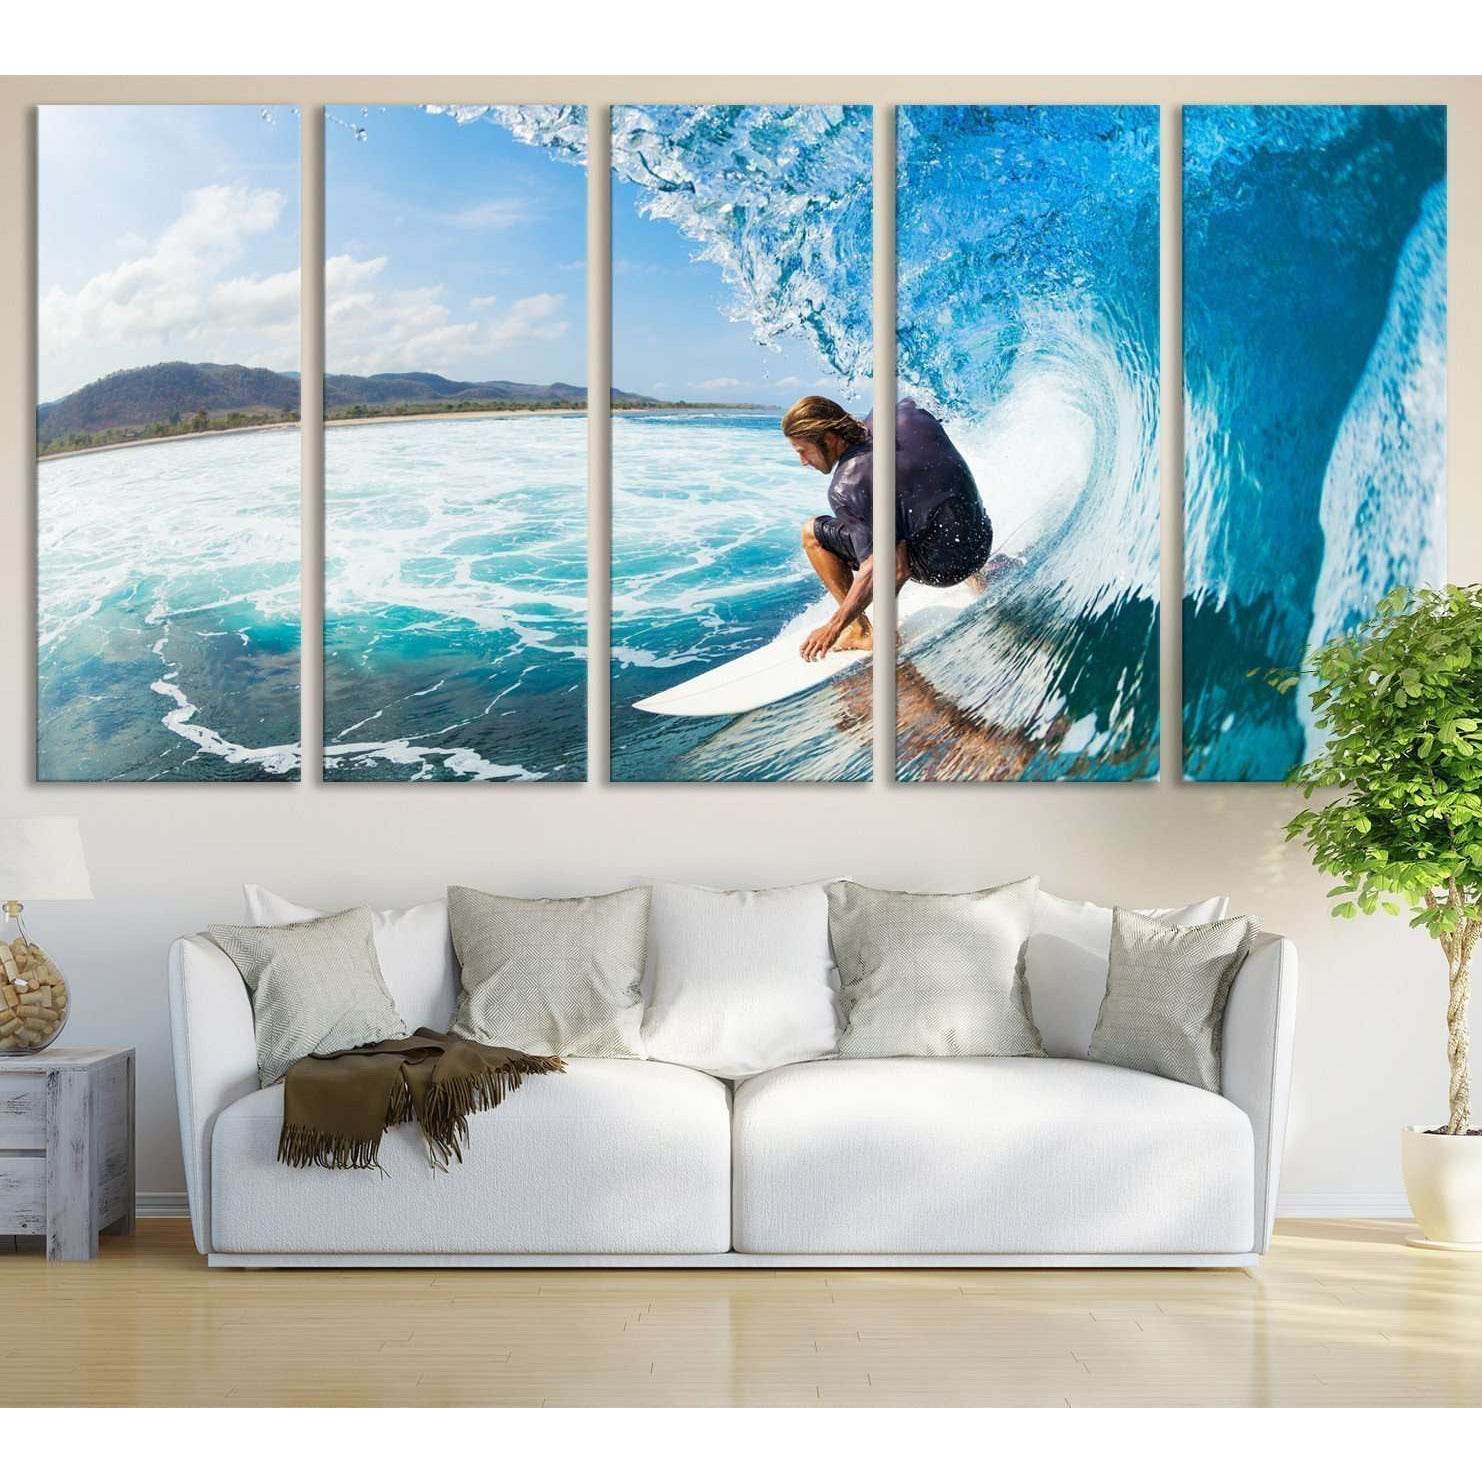 Surfing №655 Ready to Hang Canvas Print